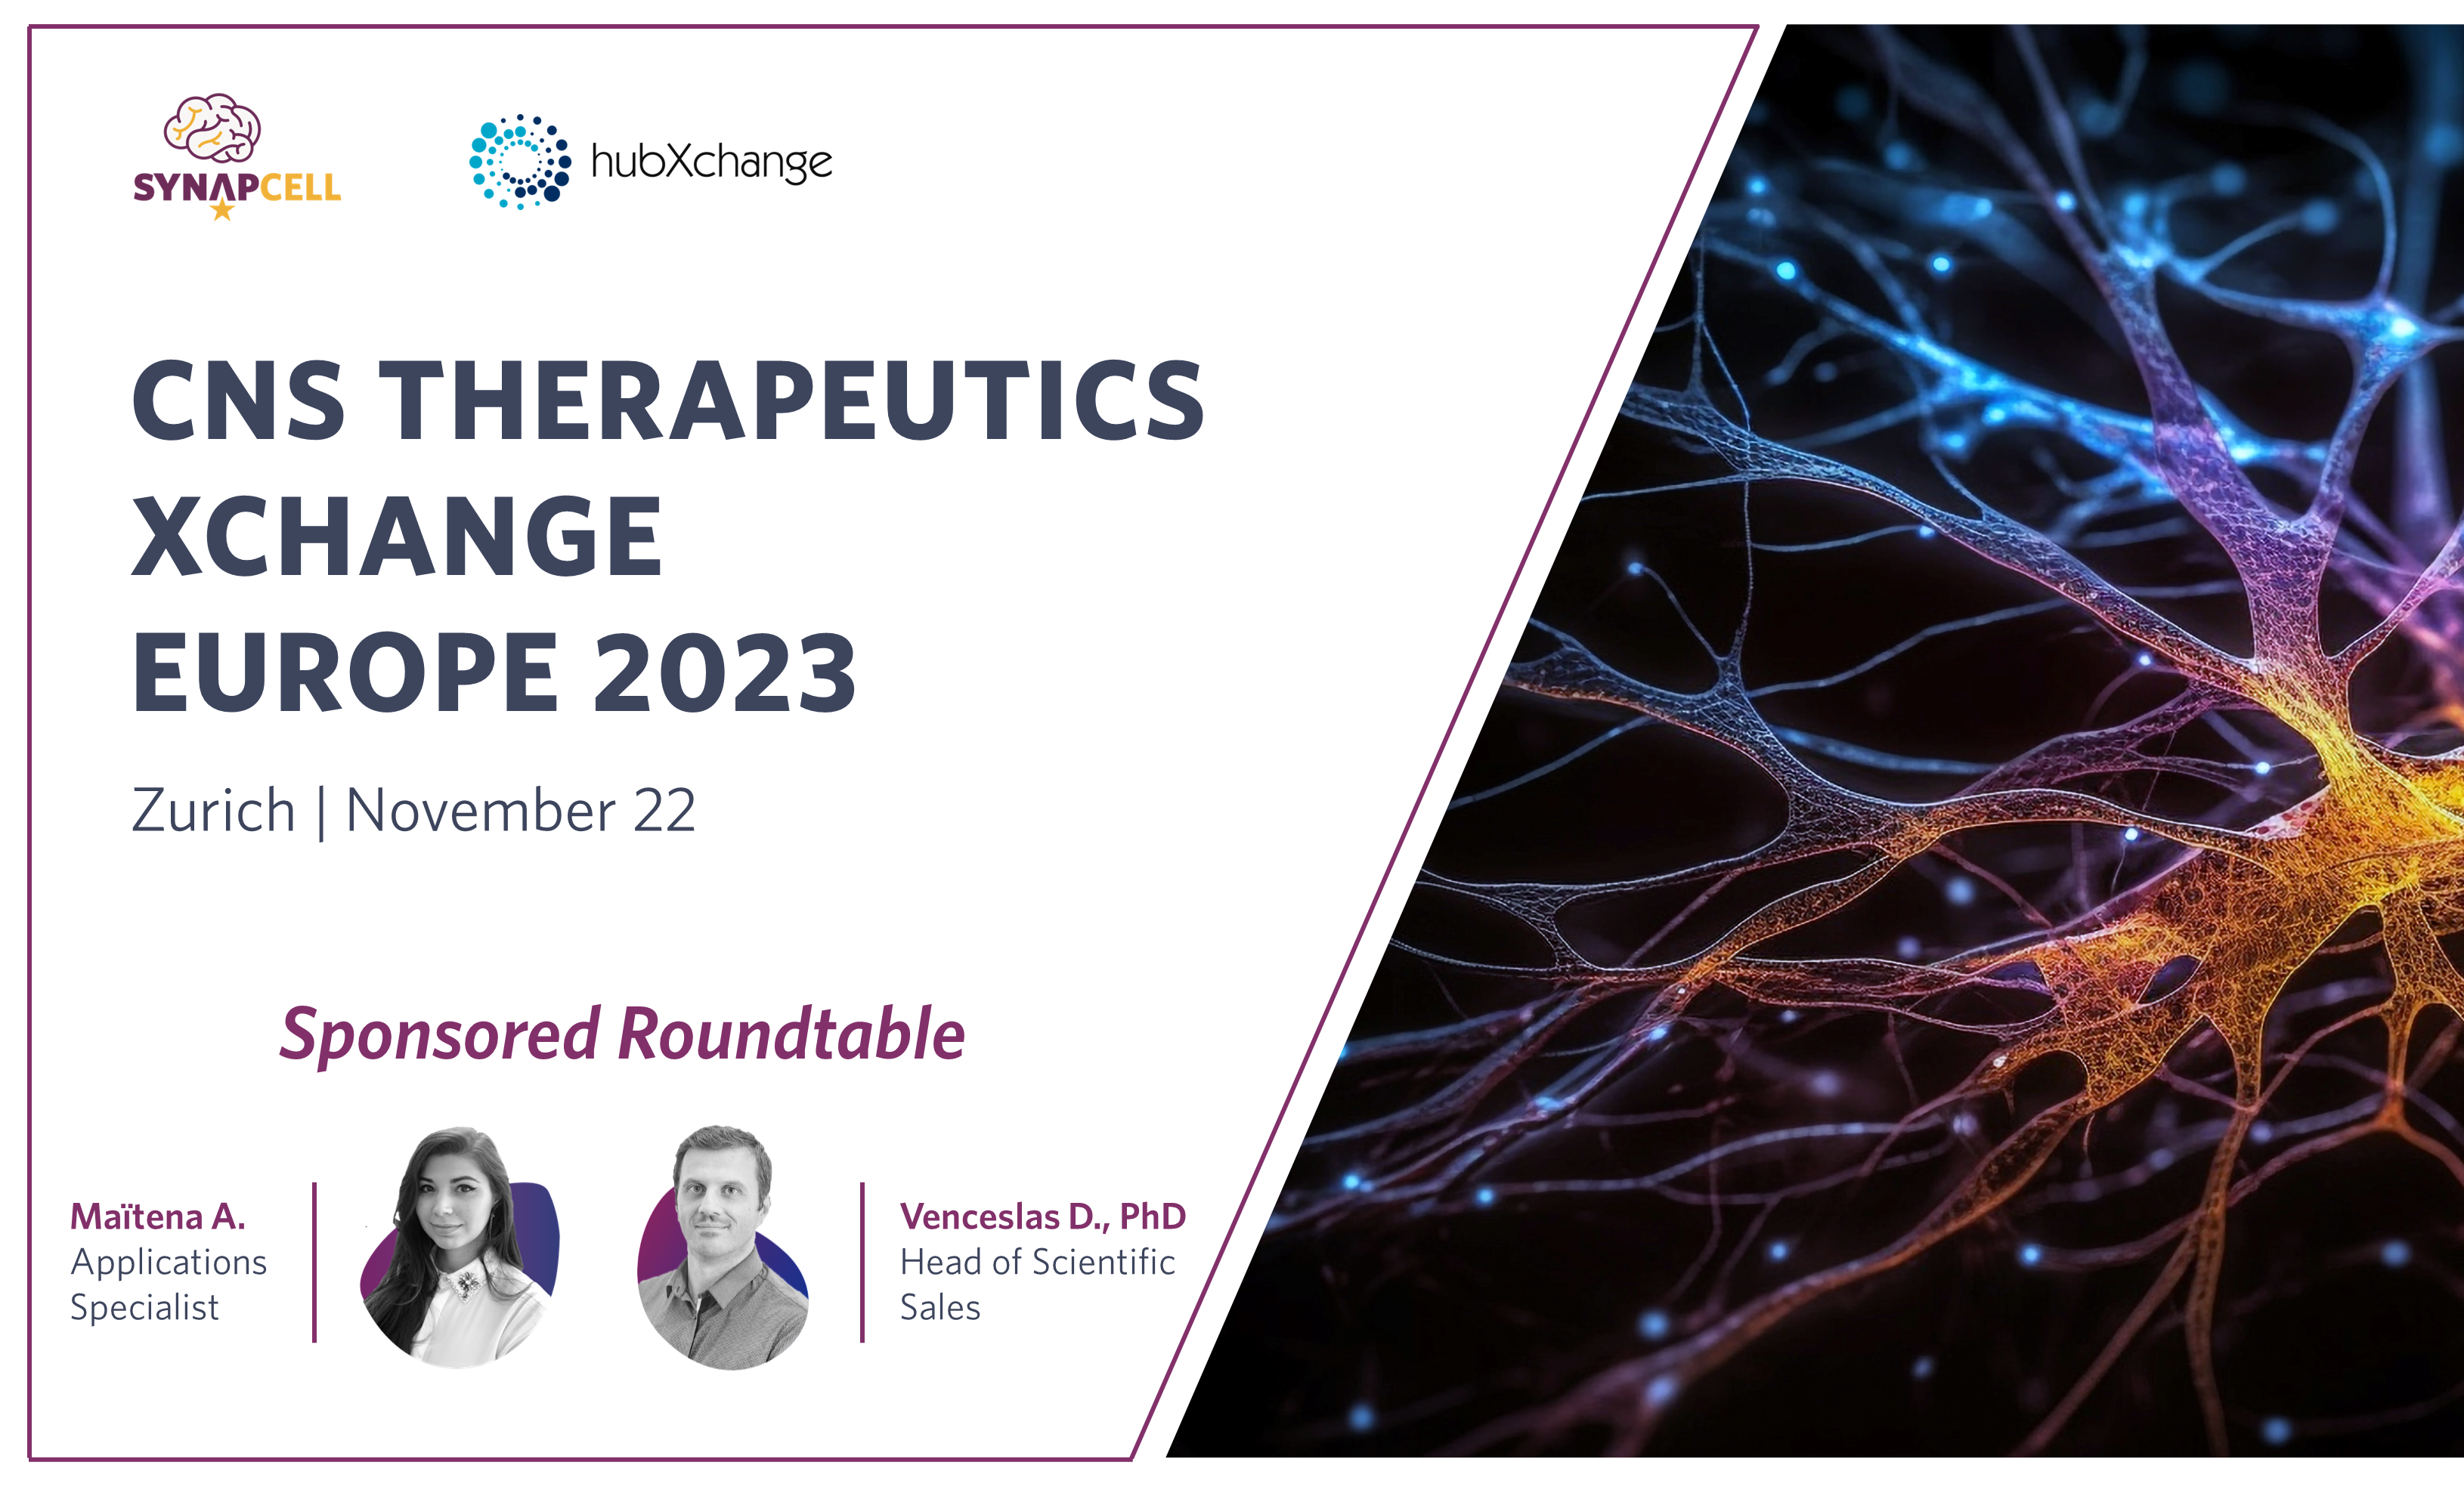 CNS XChange Europe SynapCell sponsored roundtable